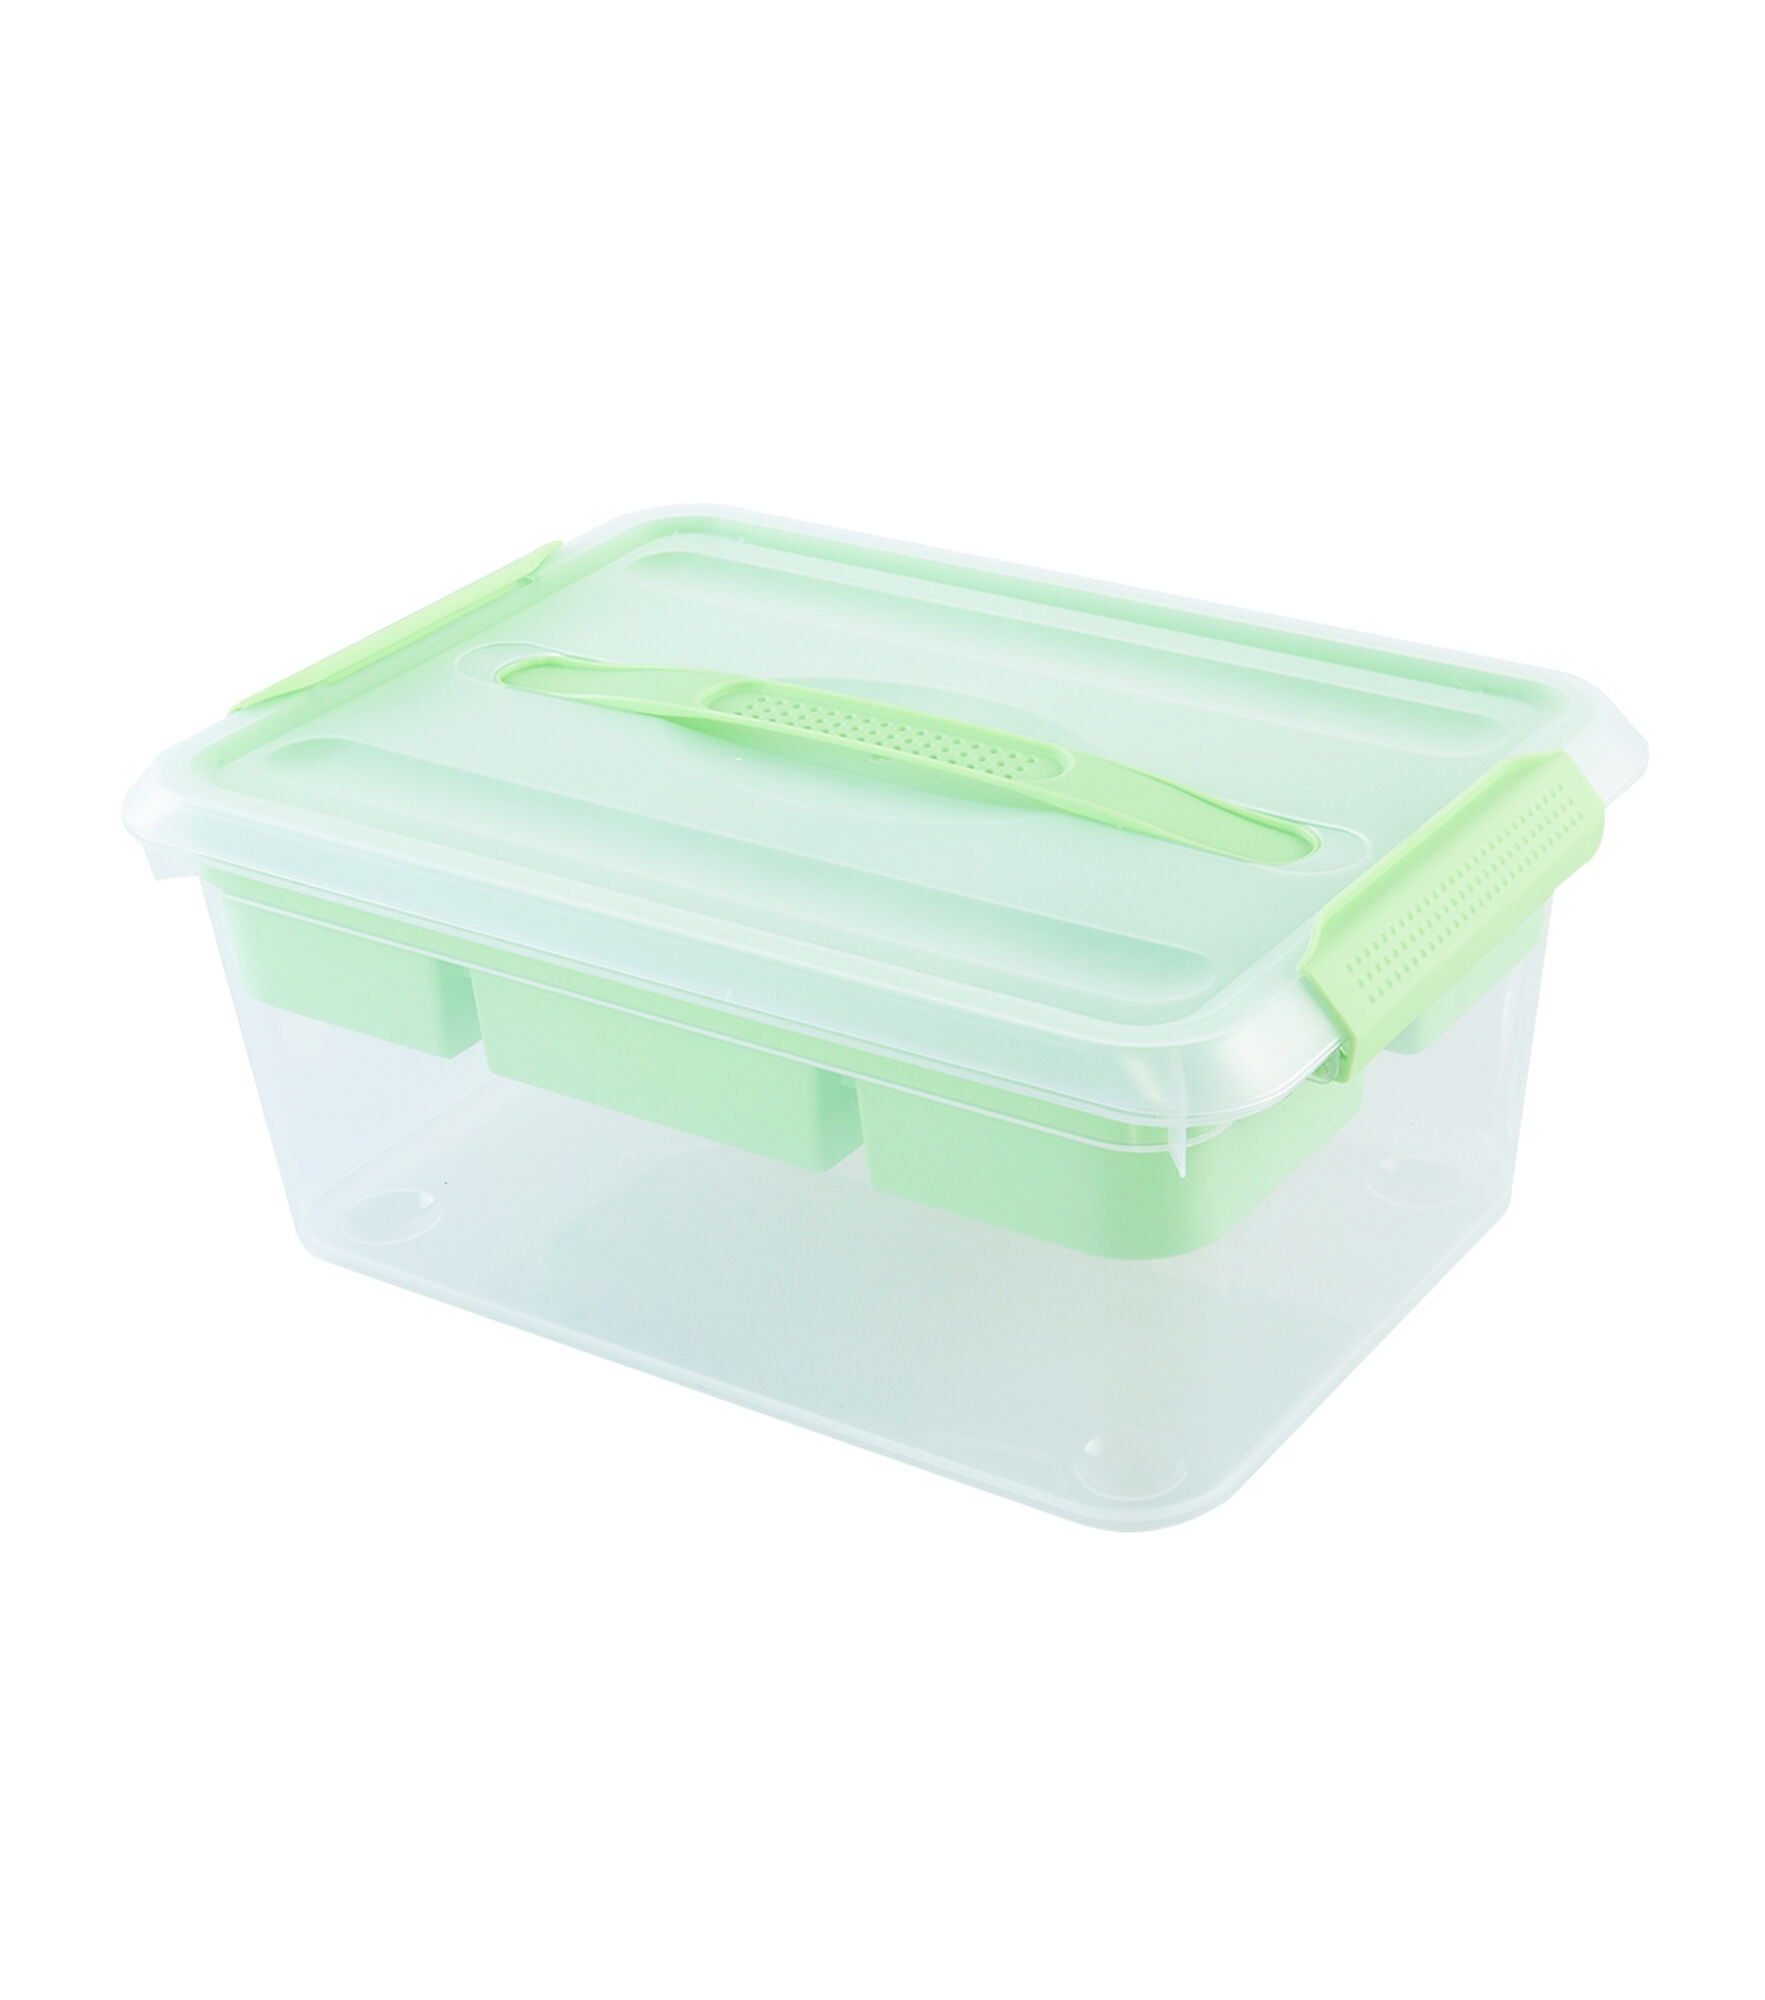 Top Notch 7 x 16 Latchmate Plastic Storage Bin with Compartments - Green - Craft Storage - Storage & Organization - JOANN Fabric and Craft Stores